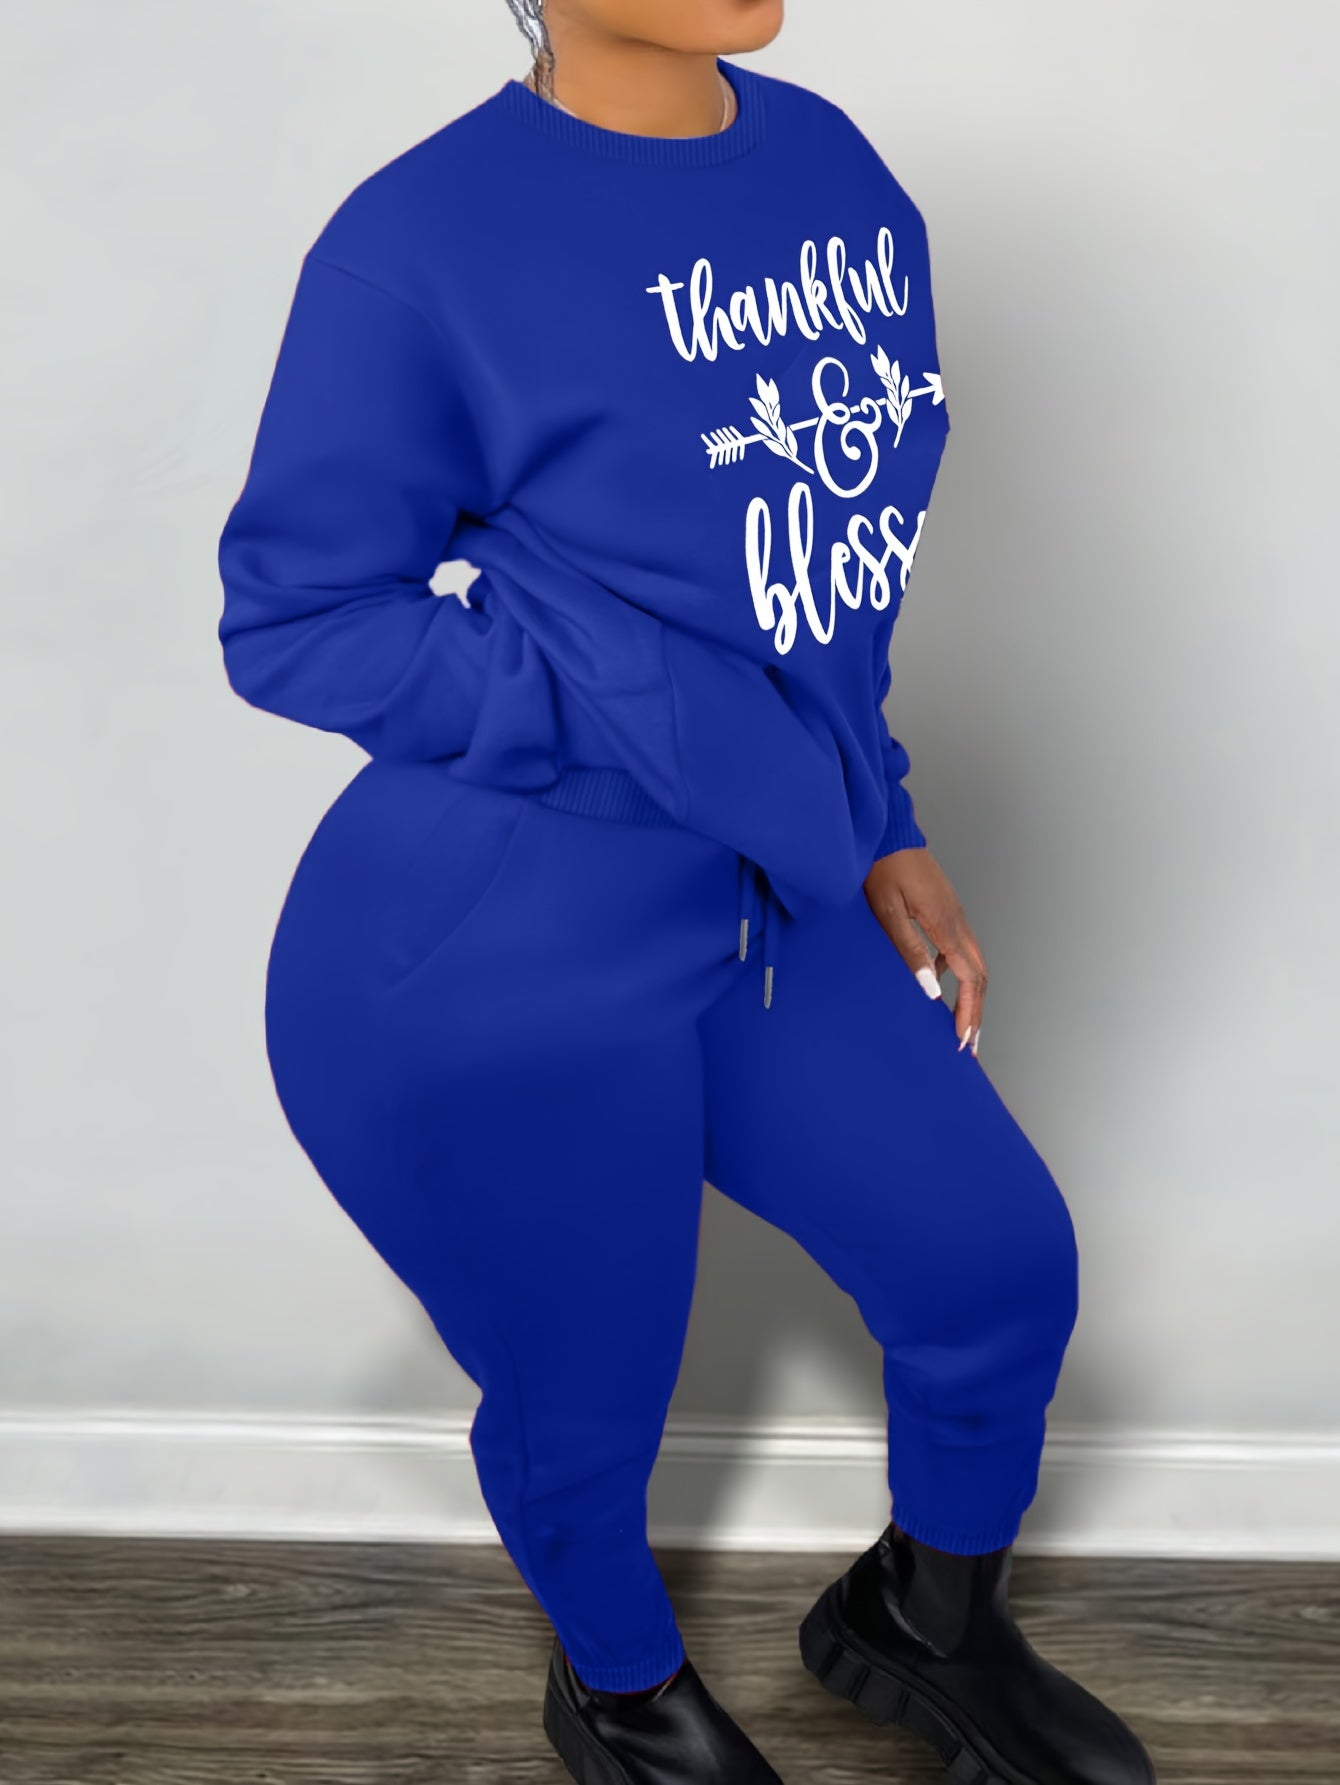 Thankful & Blessed Women's Christian Casual Outfit claimedbygoddesigns